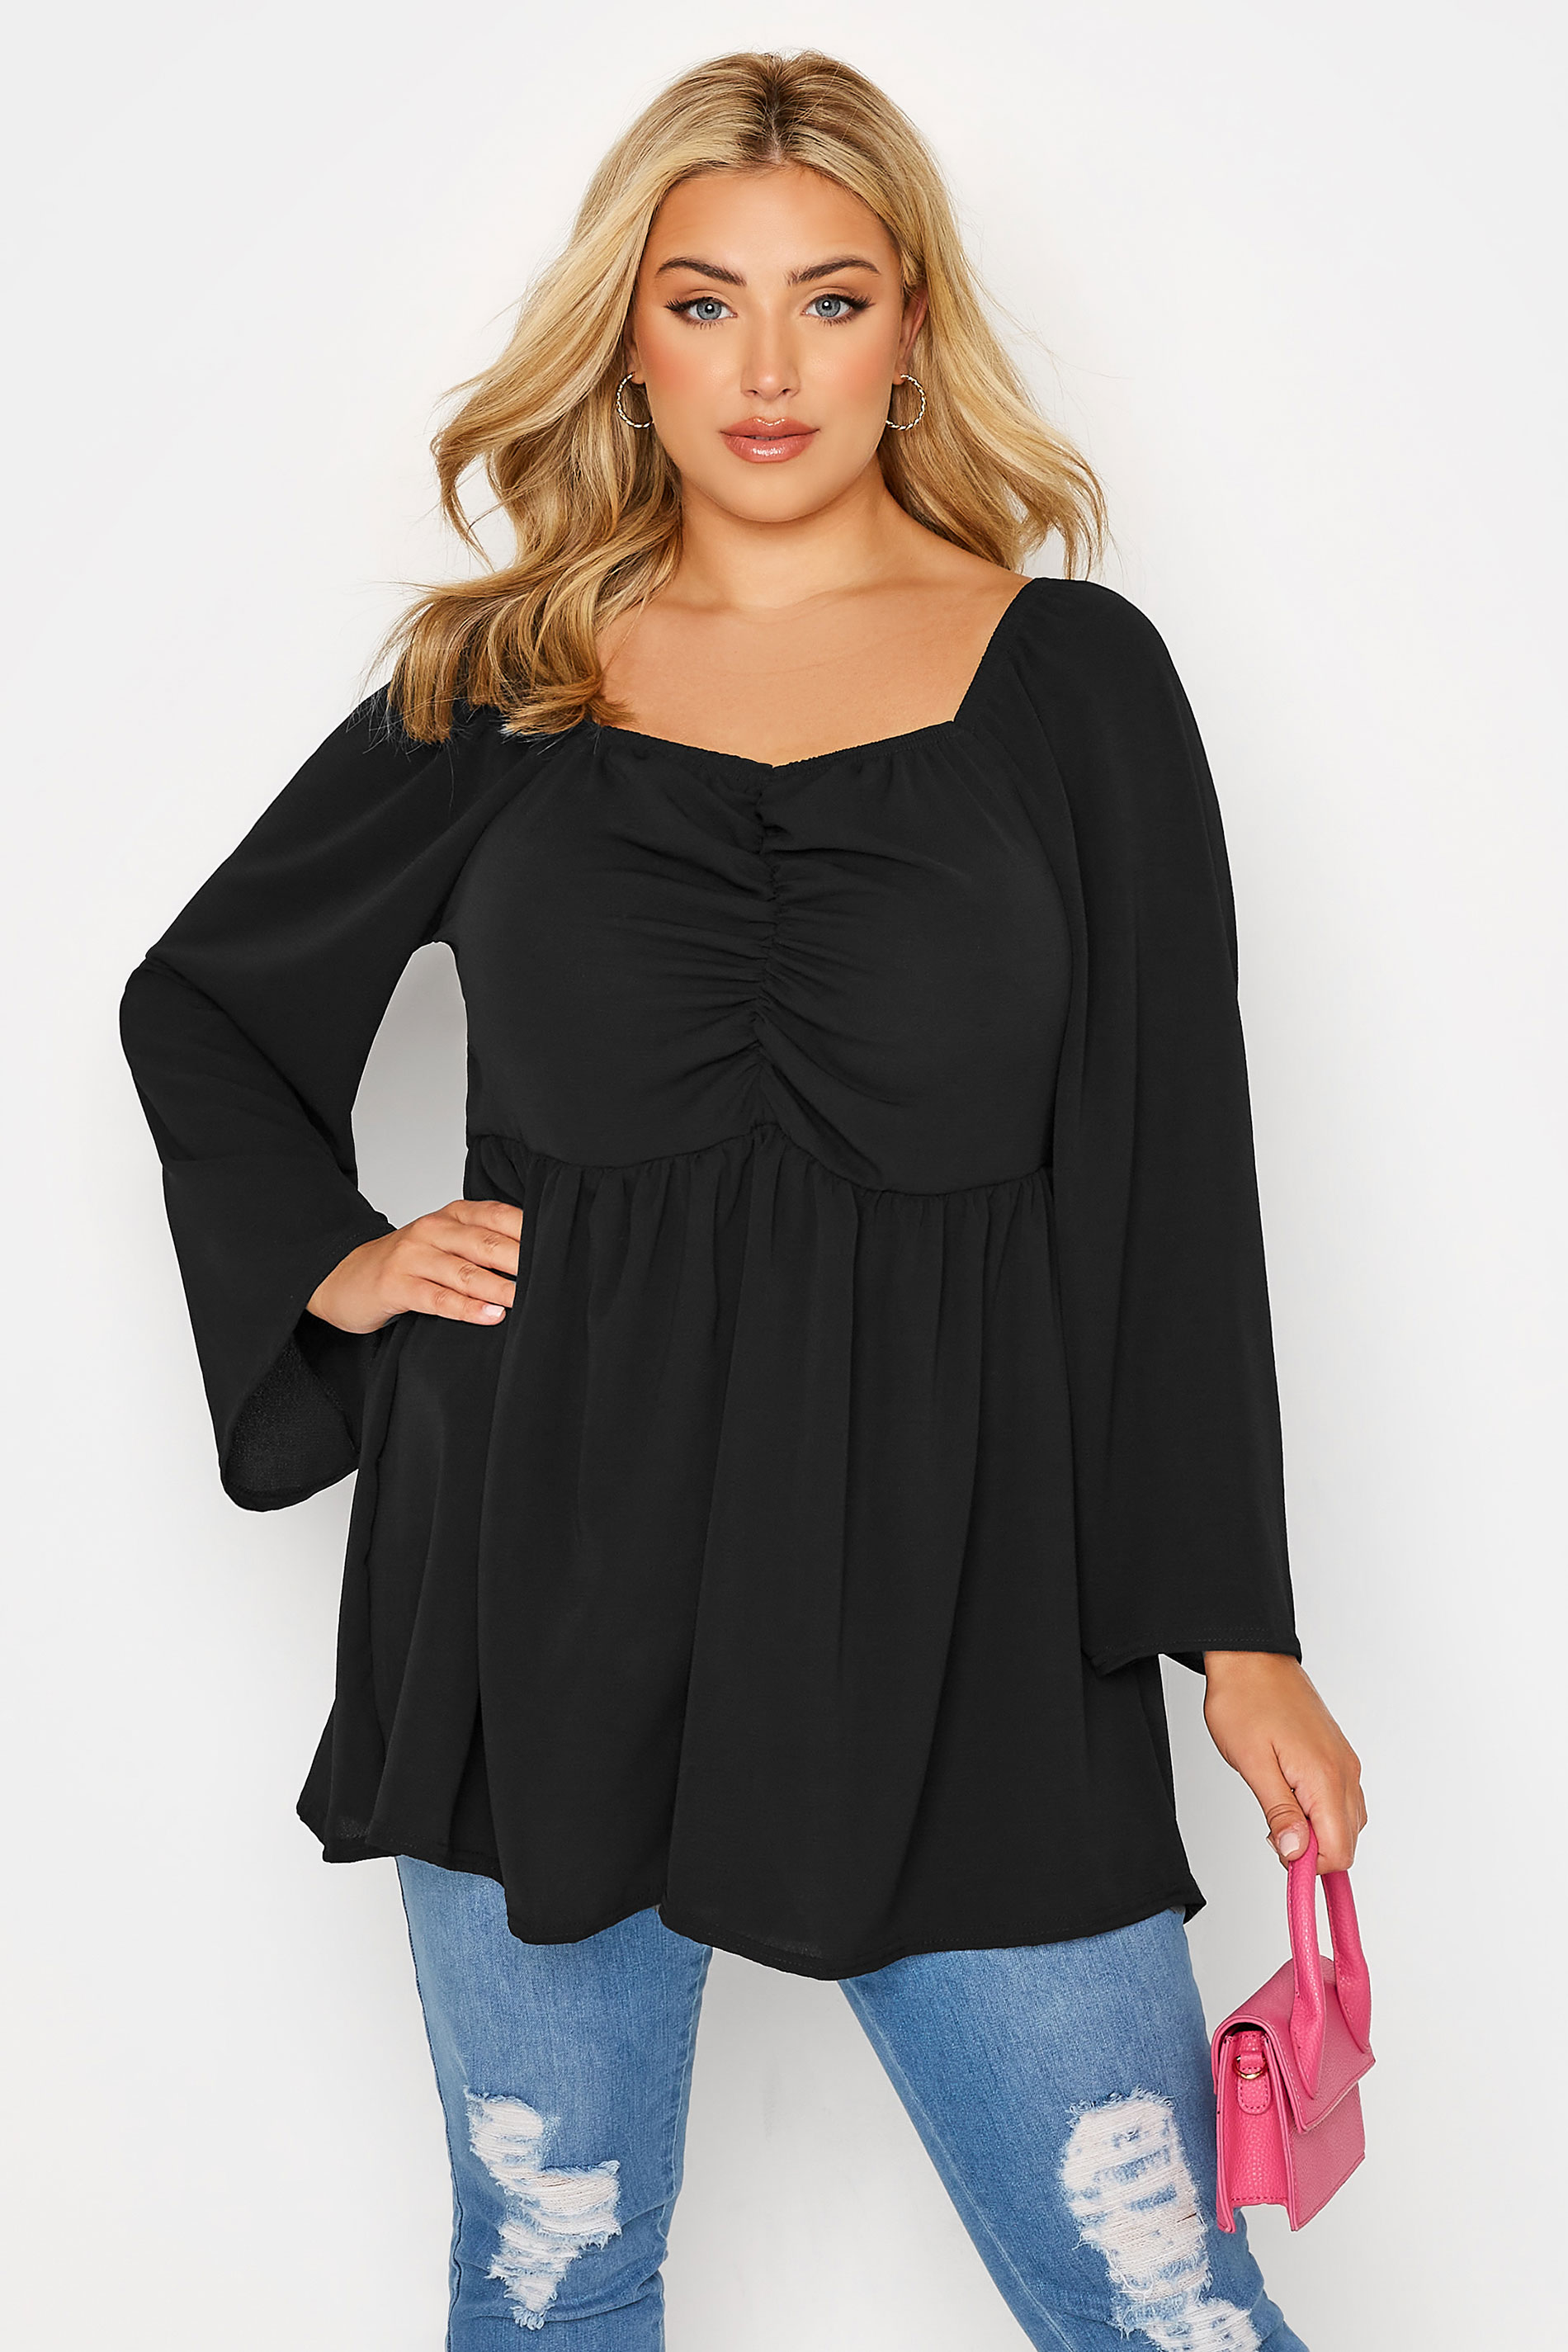 LIMITED COLLECTION Curve Black Ruched Blouse 1